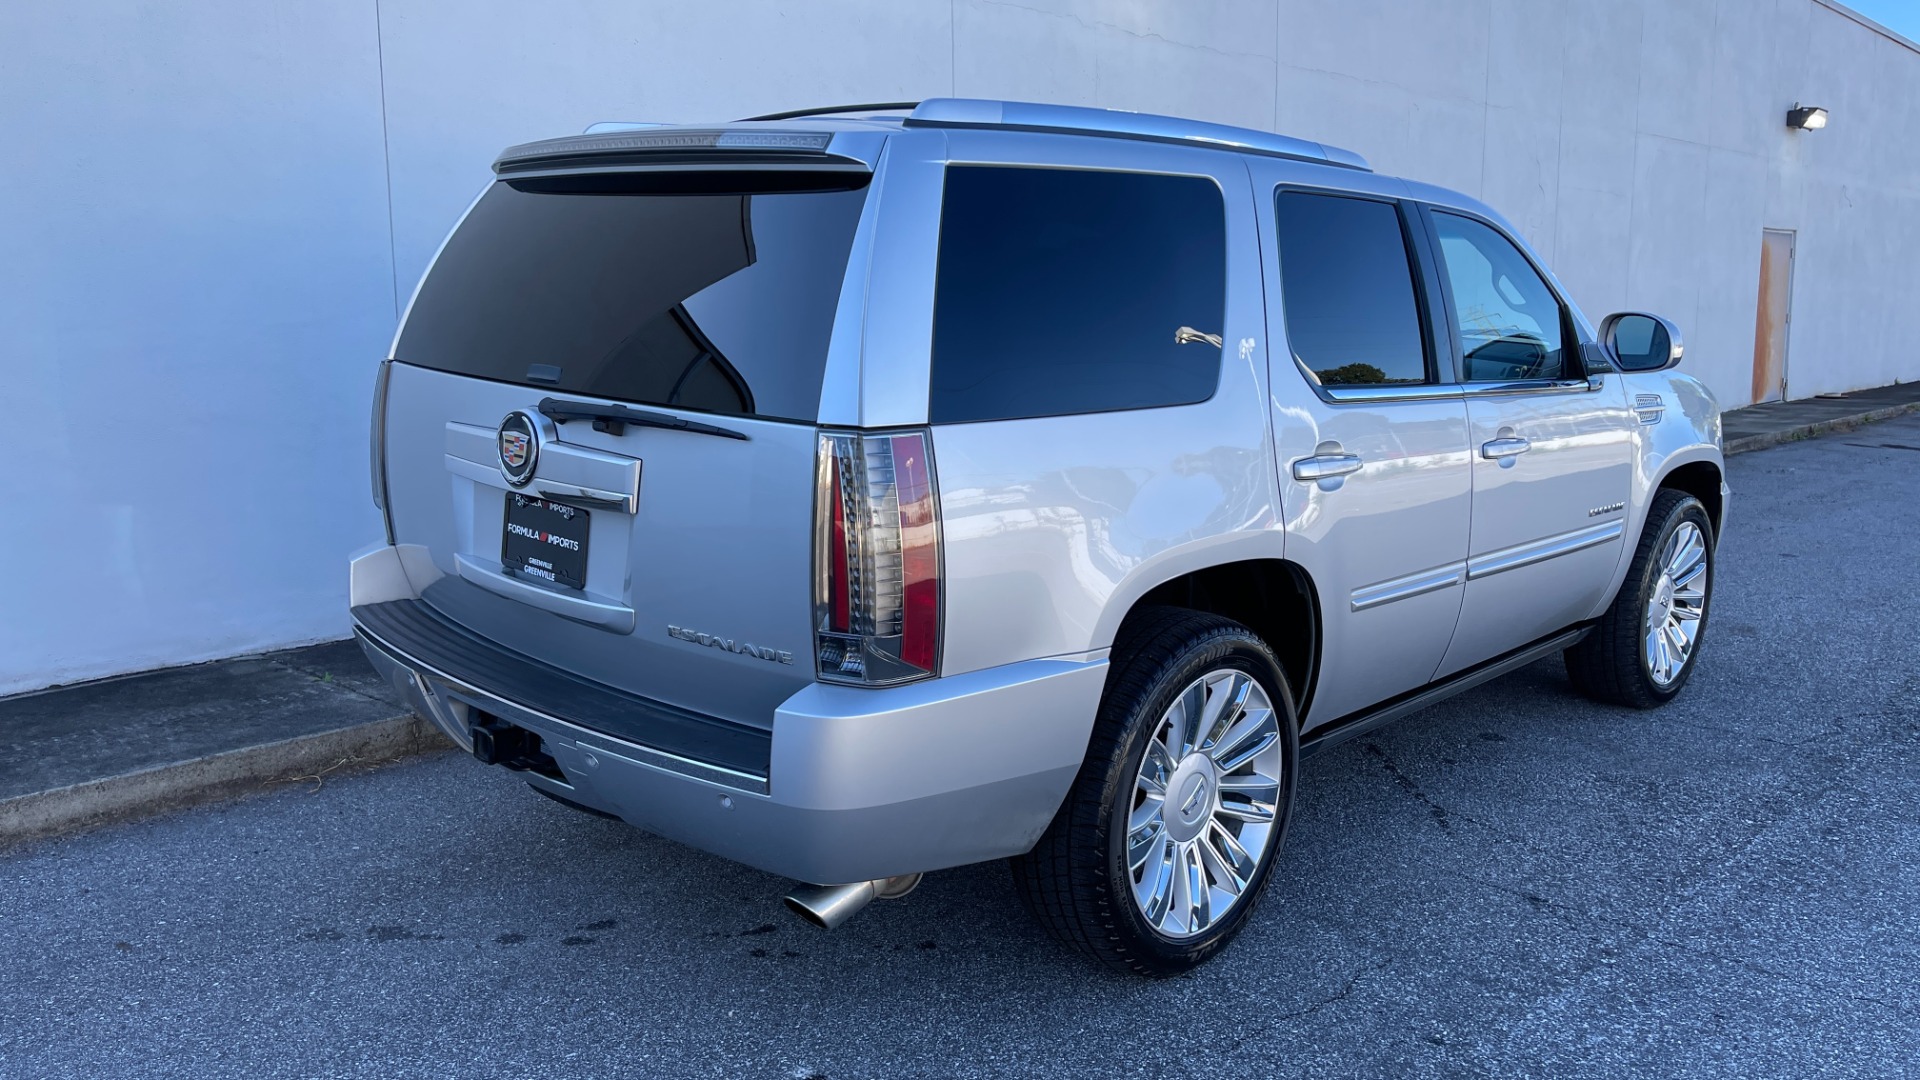 Used 2013 Cadillac Escalade PREMIUM / NAVIGATION / LEATHER / 3 ROW / AWD / LED LIGHTS for sale $25,599 at Formula Imports in Charlotte NC 28227 3